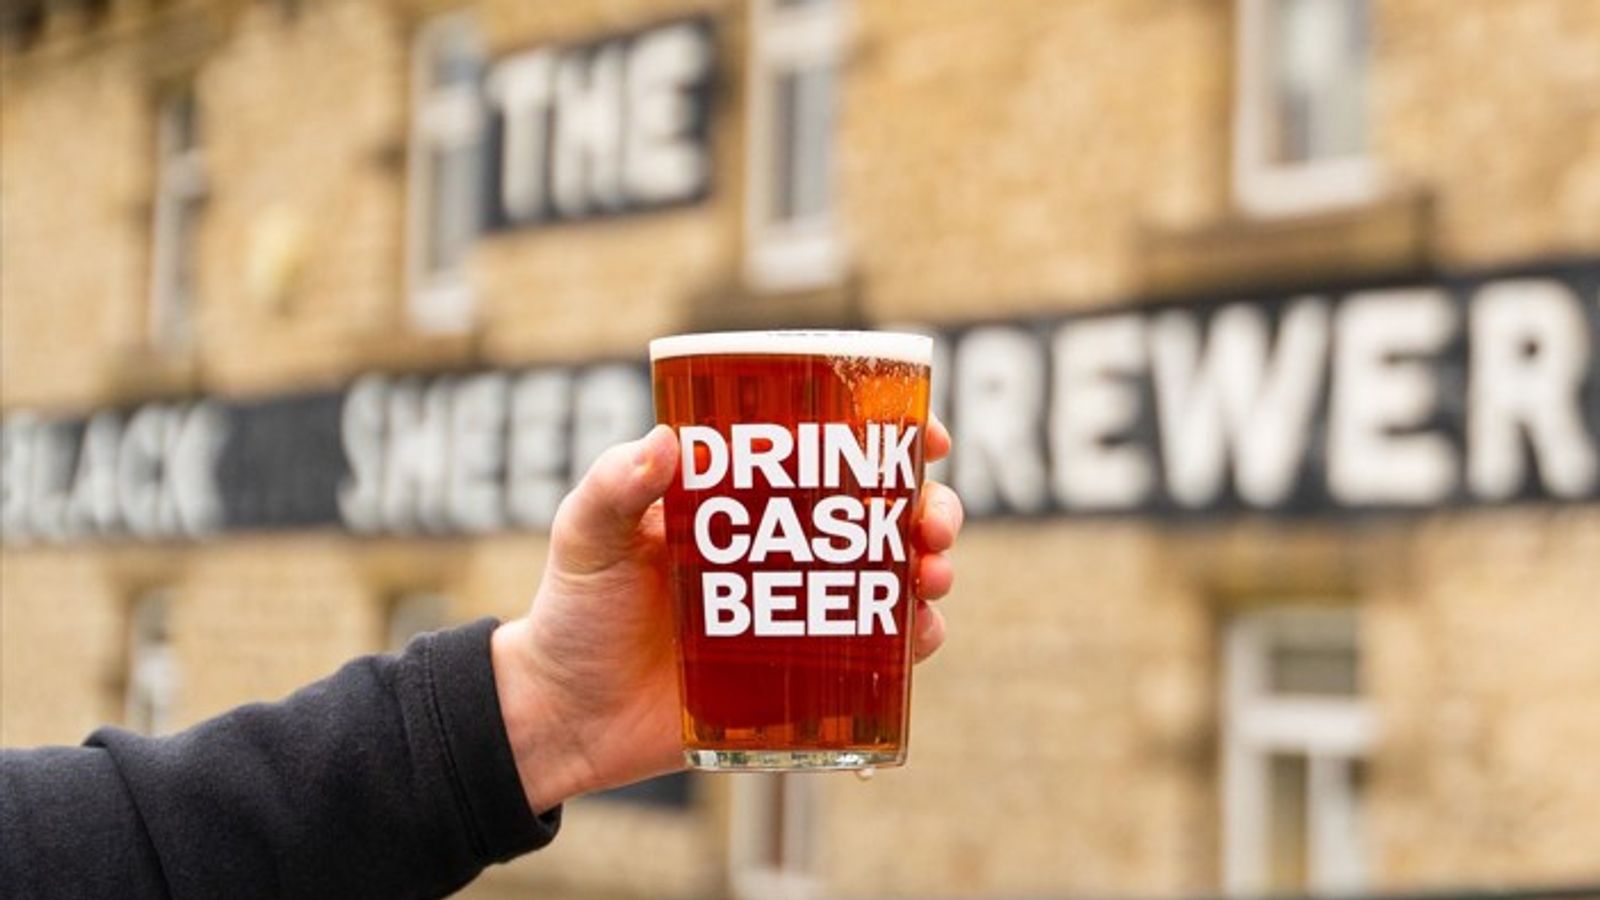 Breal Capital aims to toast famous Yorkshire brewer Black Sheep